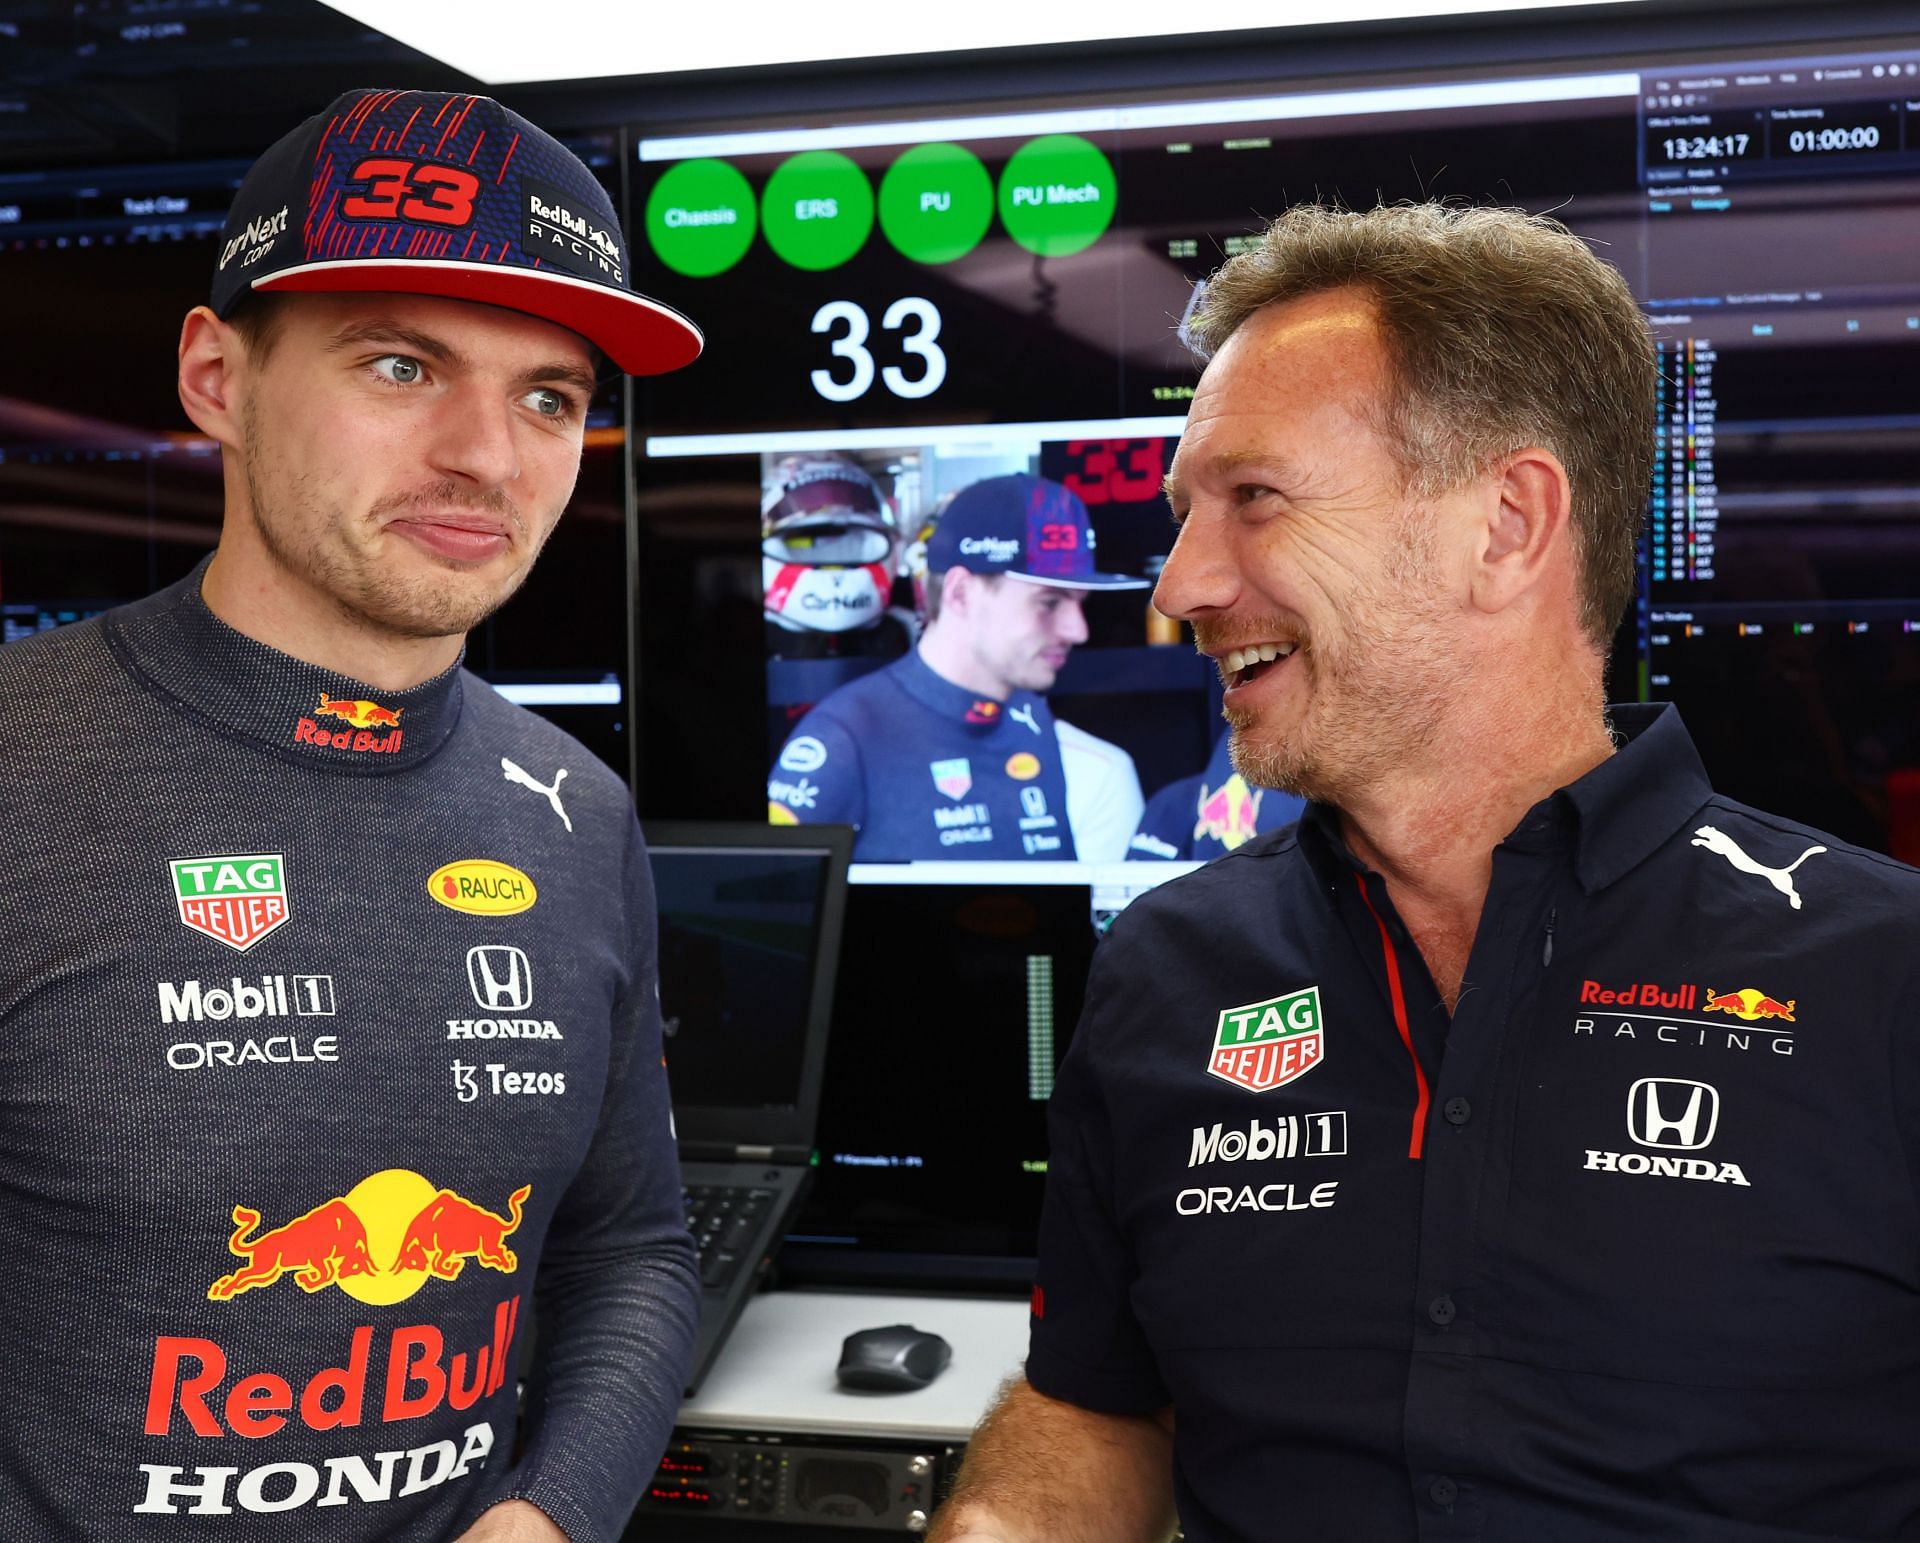 Max Verstappen and Red Bull Racing Team Principal Christian Horner talk in the garage during practice ahead of the 2021 Abu Dhabi Grand Prix. (Photo by Mark Thompson/Getty Images)